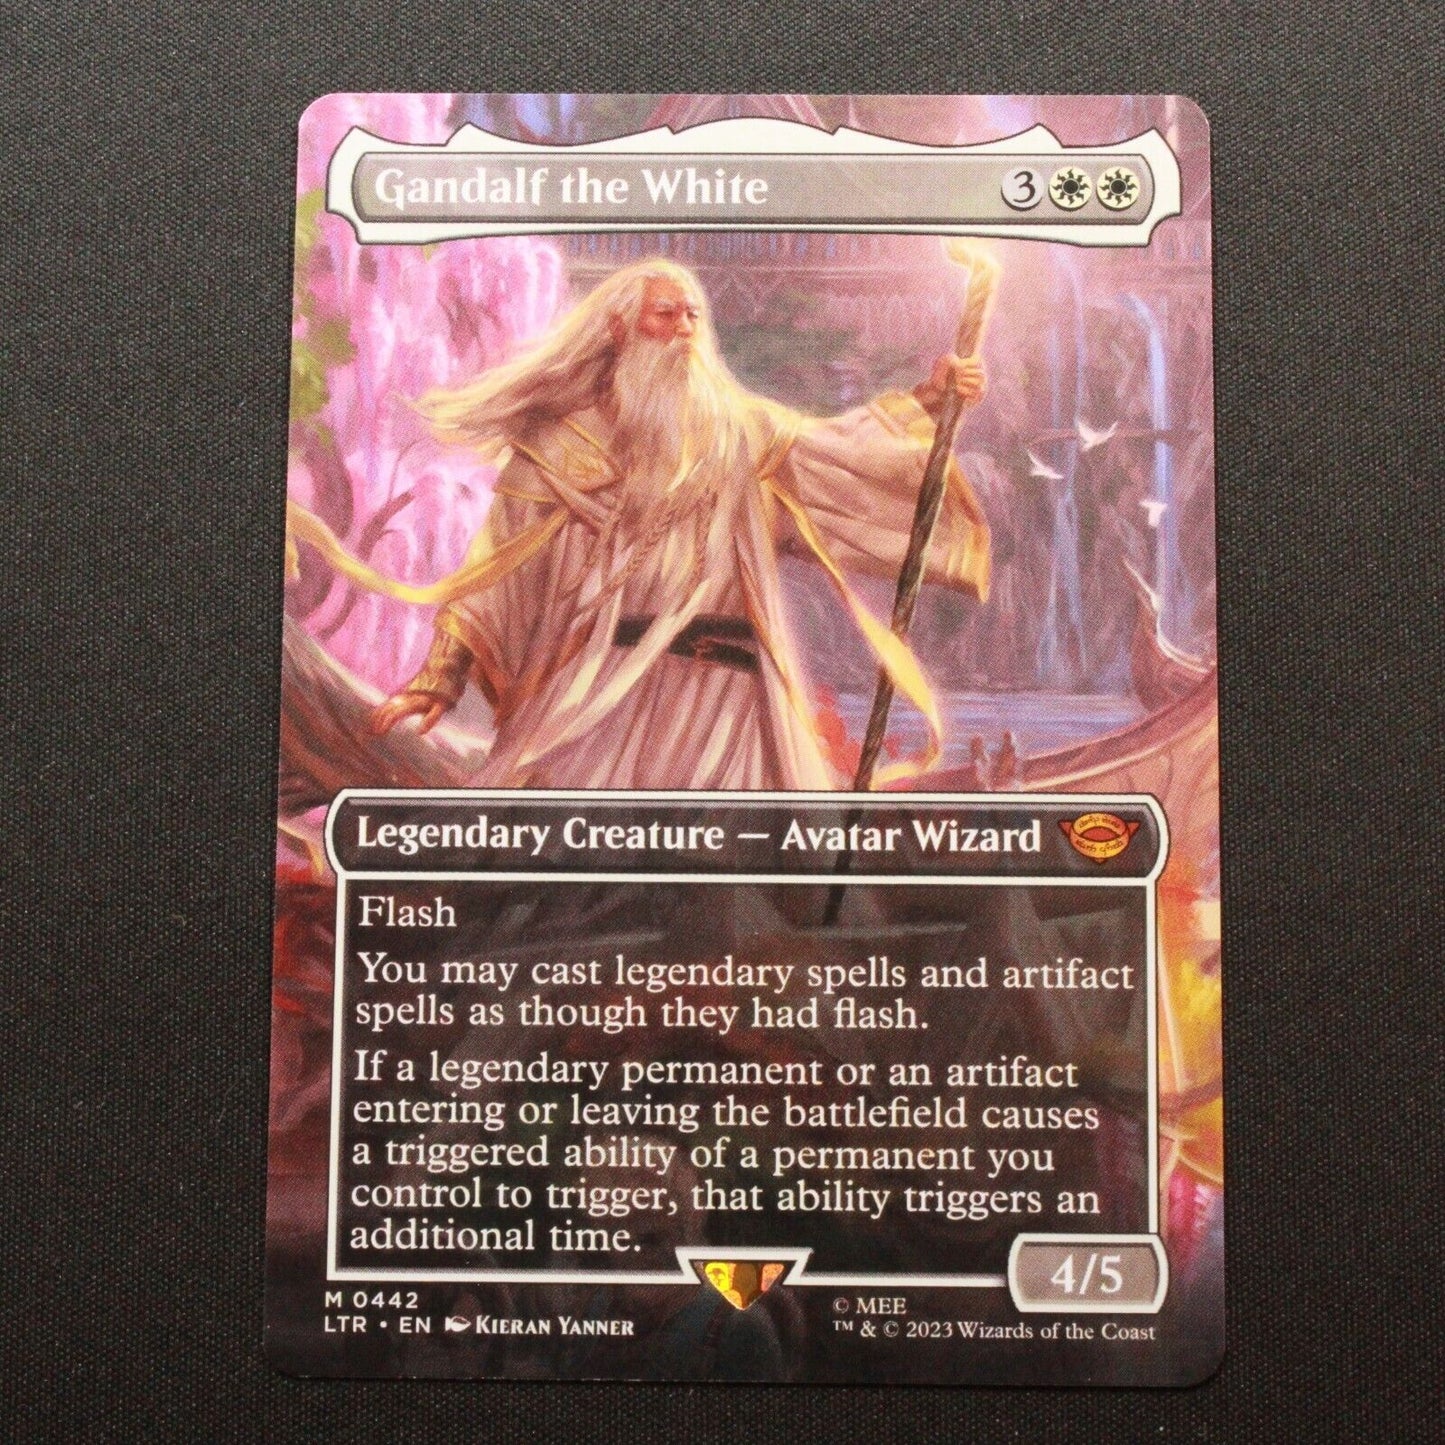 MTG The Lord of the Rings (LTR) Mythic Gandalf the White (Borderless) 442 NM